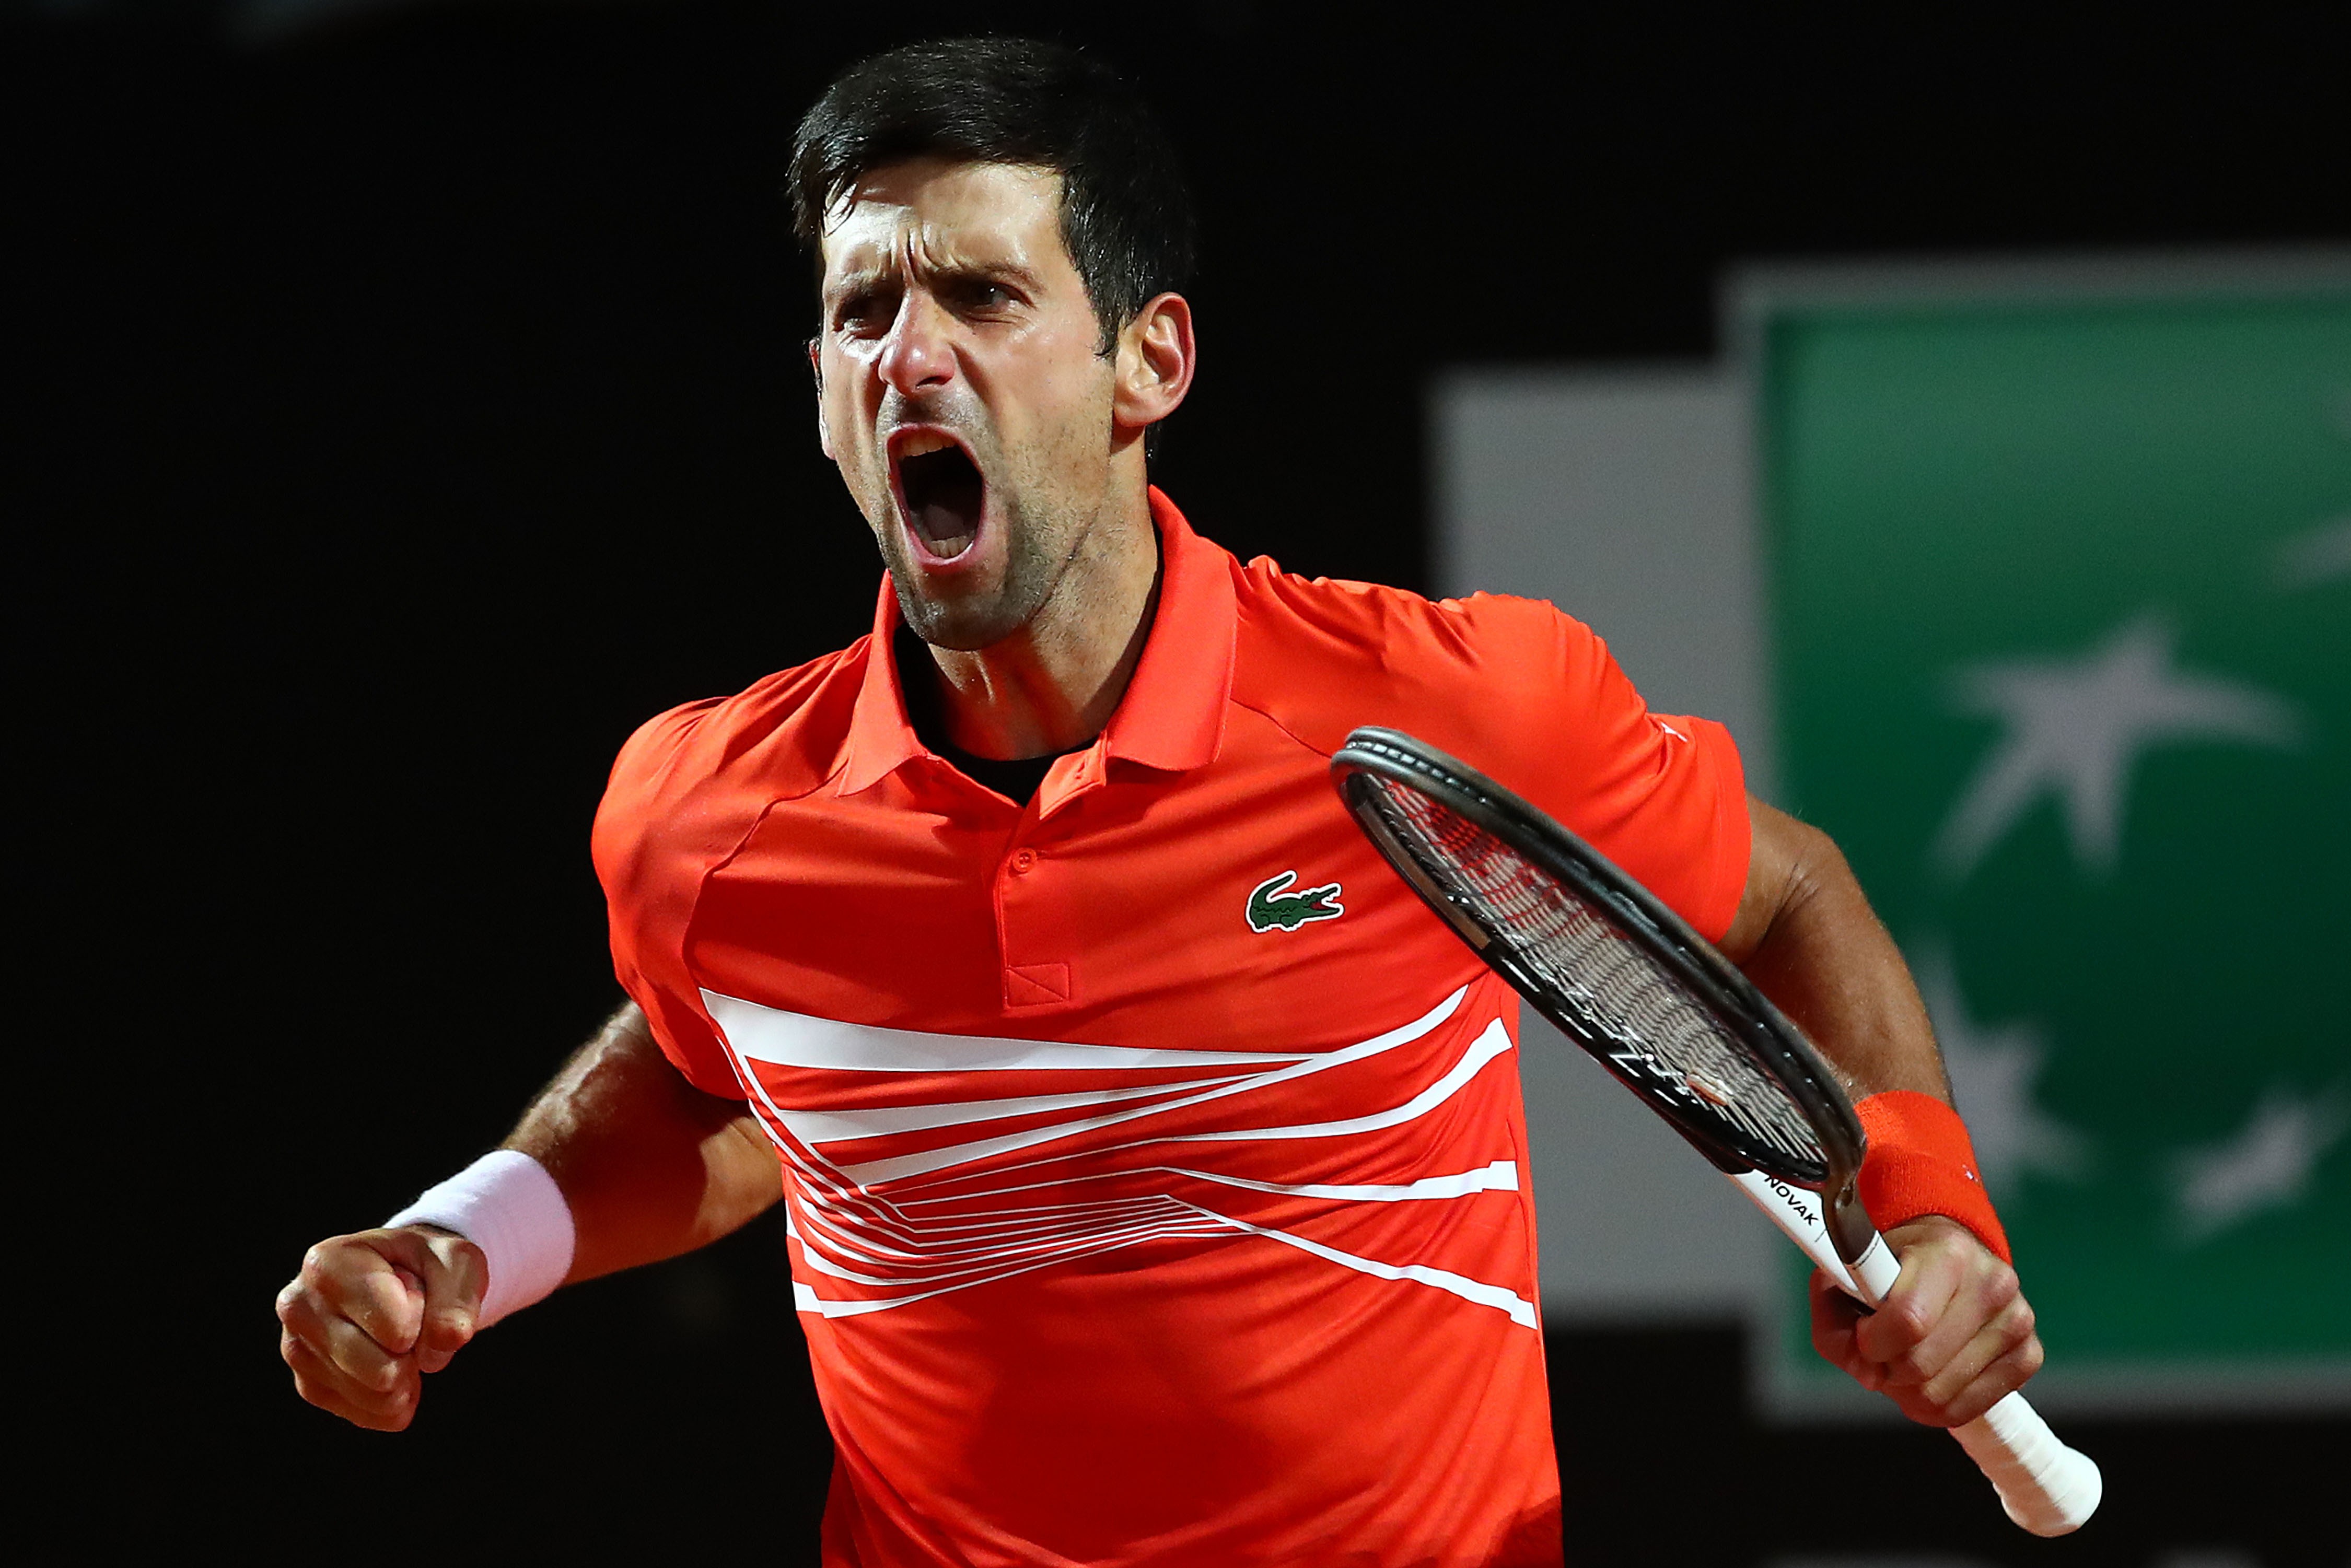 ROME, ITALY - MAY 17: Novak Djokovic of Serbia celebrates against Juan Martin del Potro of Argentina in their Men's Single Quarter Final Match during Day Six of the International BNL d'Italia at Foro Italico on May 17, 2019 in Rome, Italy. (Photo by Clive (Foto: Getty Images)